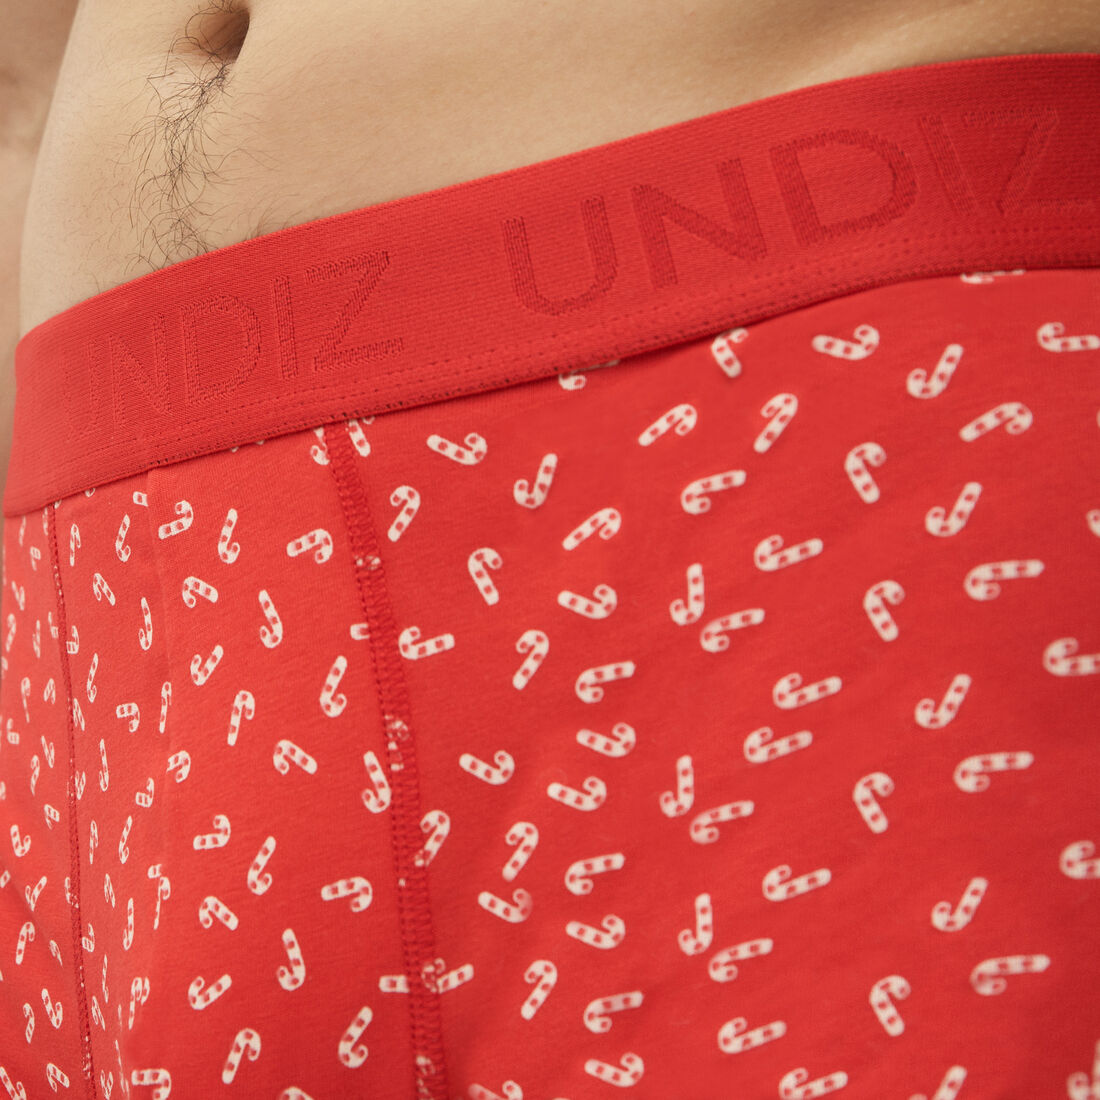 boxer shorts with candy cane pattern;